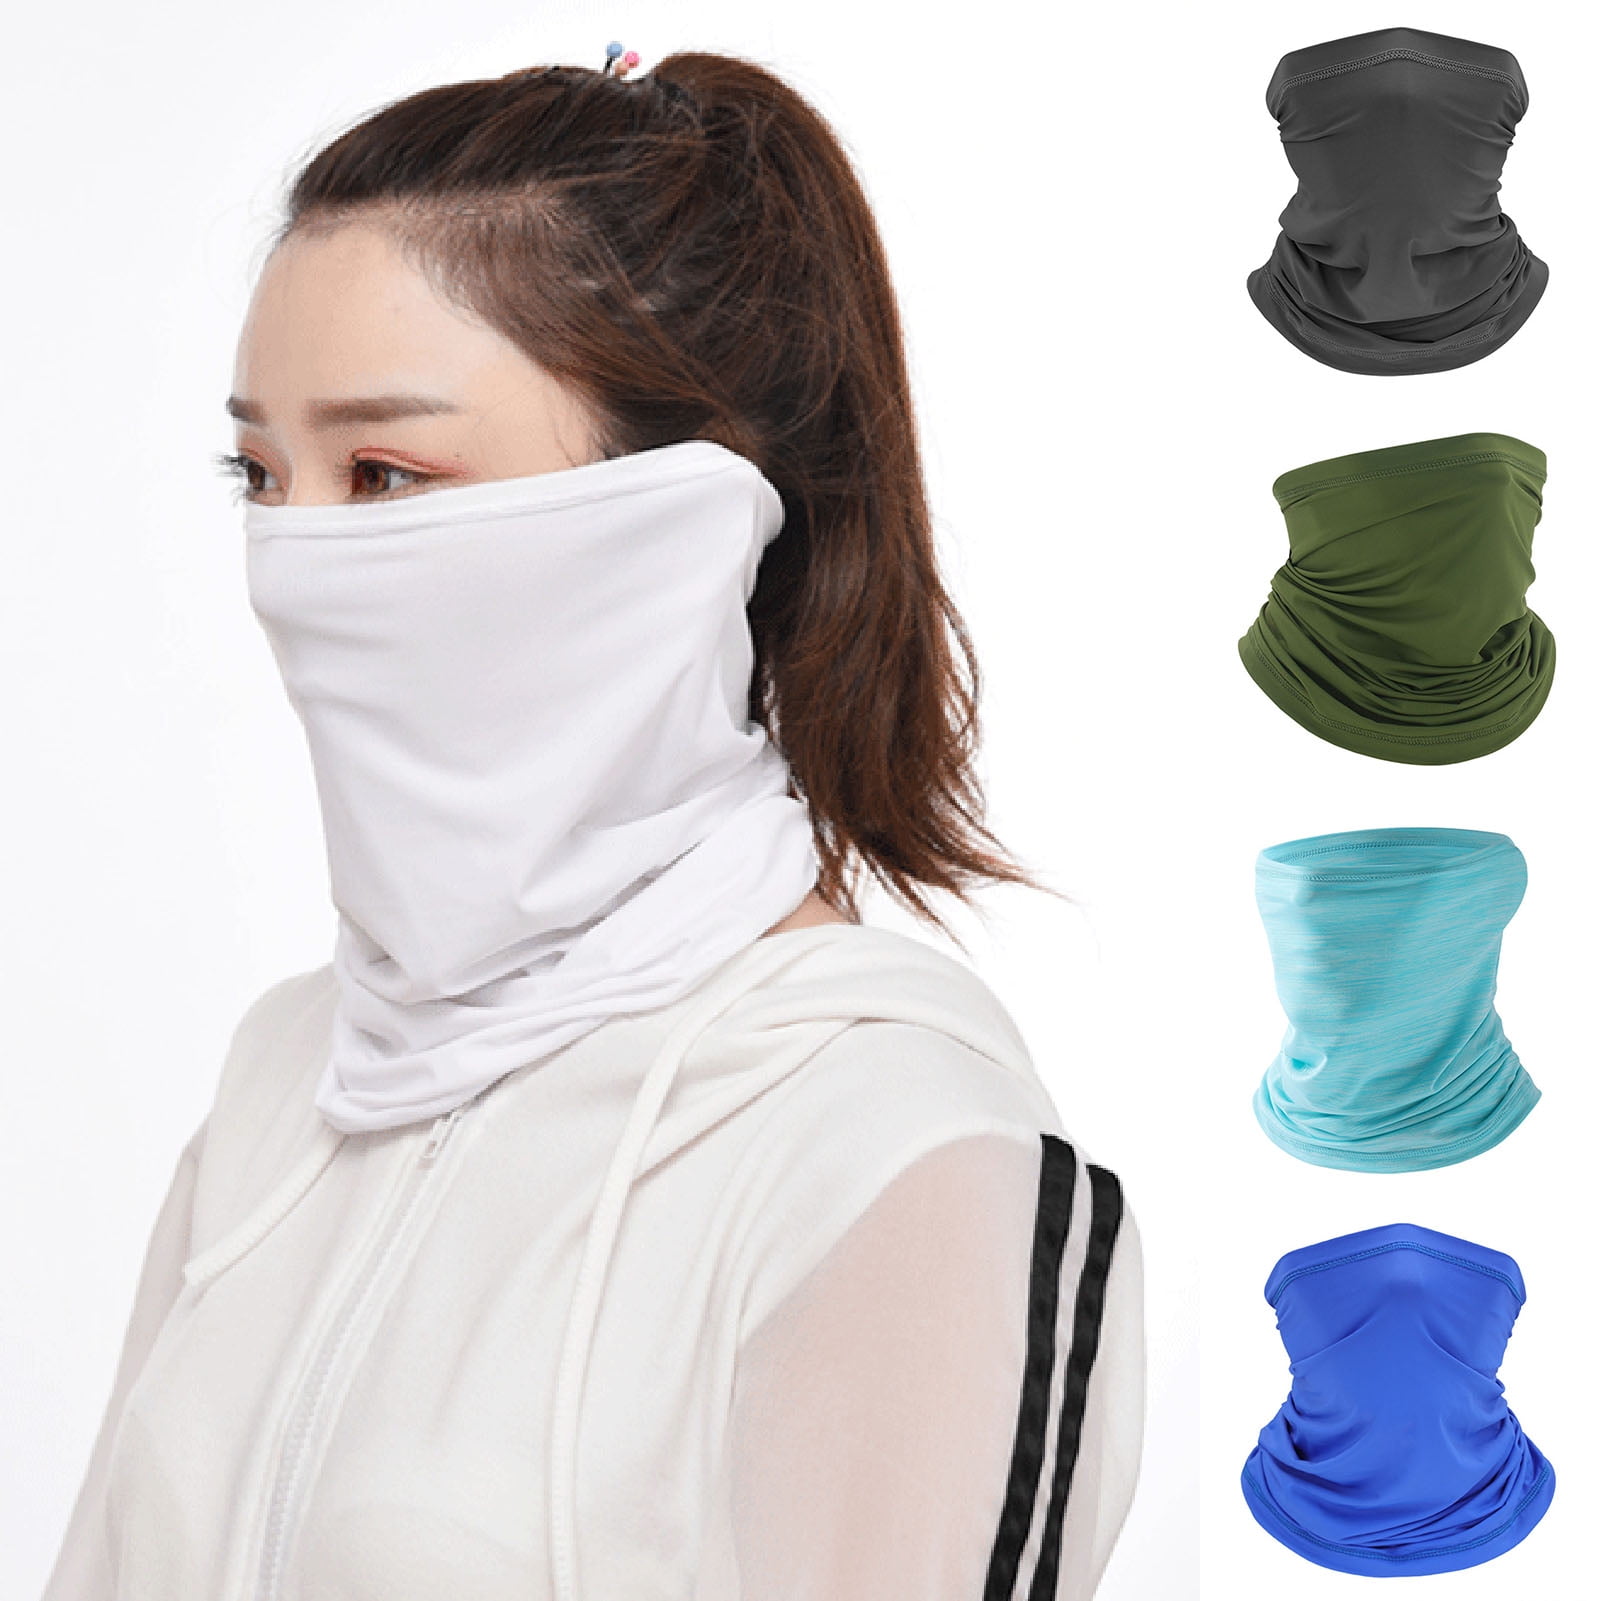 Neck Warmer Windproof Face Mask Winter Snood Scarf Loop Wrap Outdoor Cycling Hat Scarves for Men or Women St Patricks Day Shamrock 